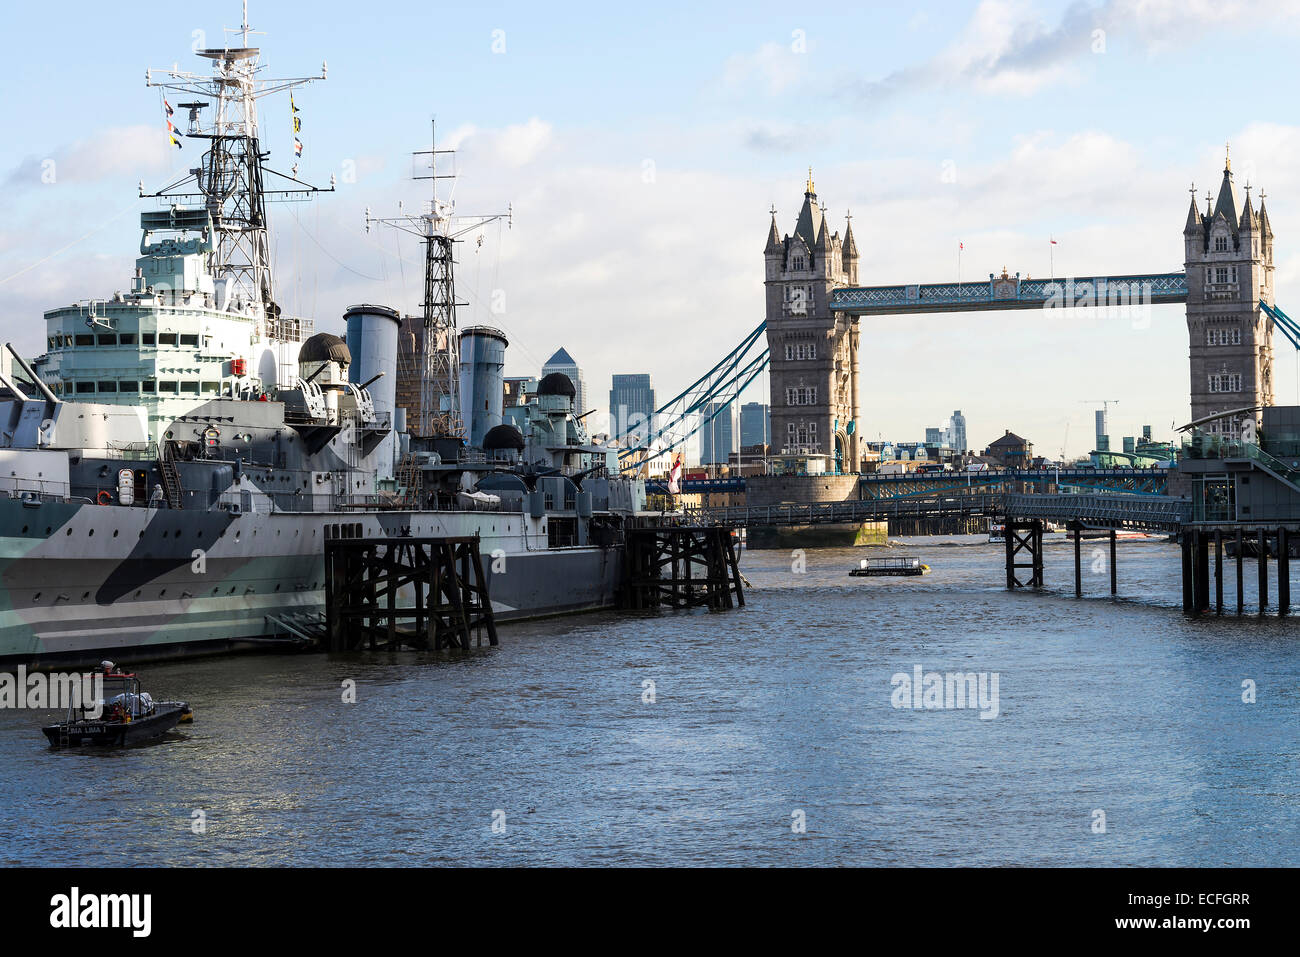 The Former Royal Navy Cruiser HMS Belfast Moored in River Thames with Tower Bridge in Background London England UK Stock Photo